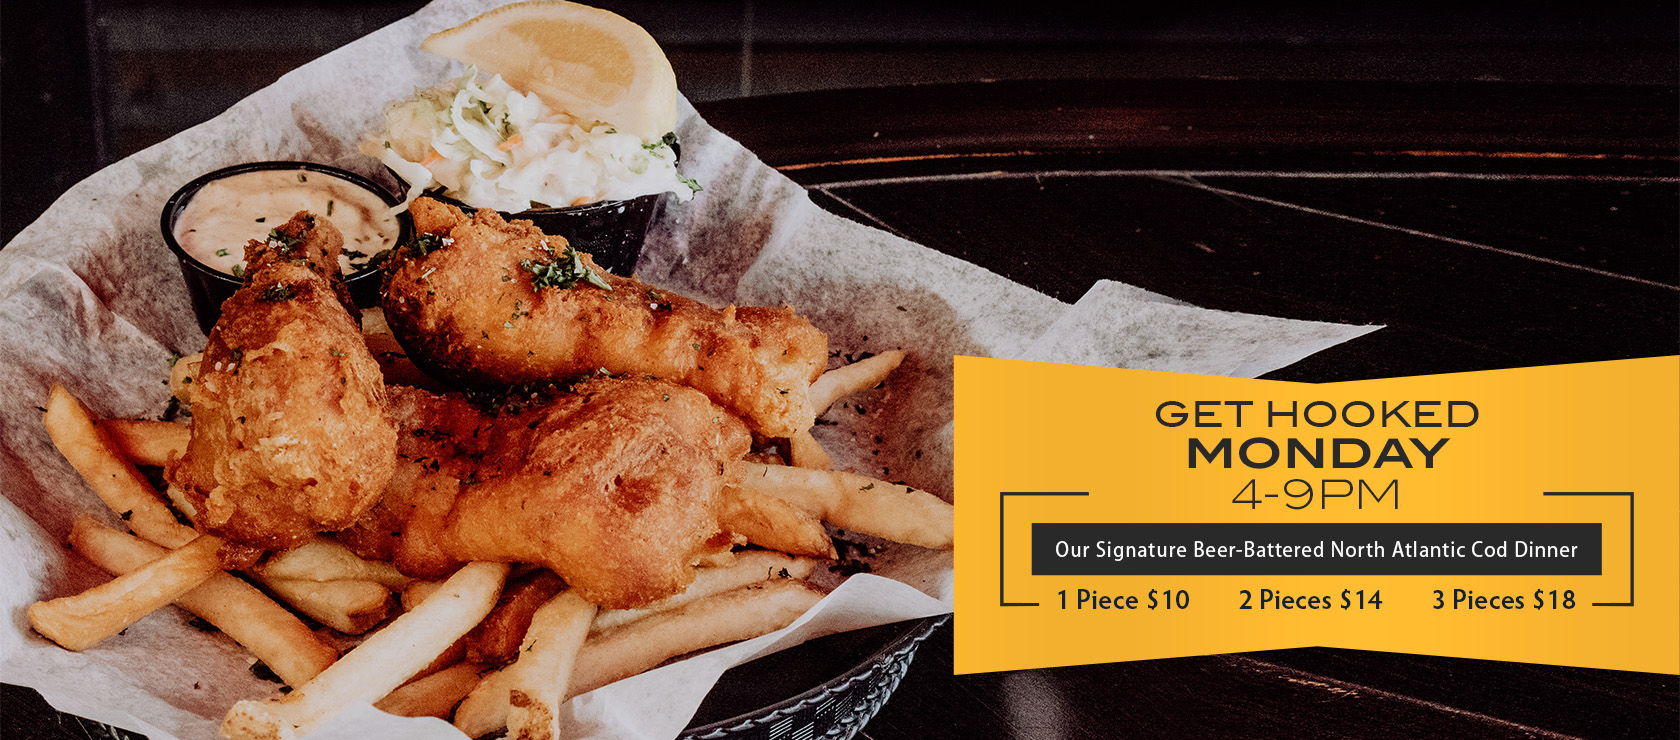 Get hooked Monday. 4-9pm. Our signature beer-battered north Atlantic cod dinner. 1 pice: $10, 2 pieces: $14, 3 pieces: $18